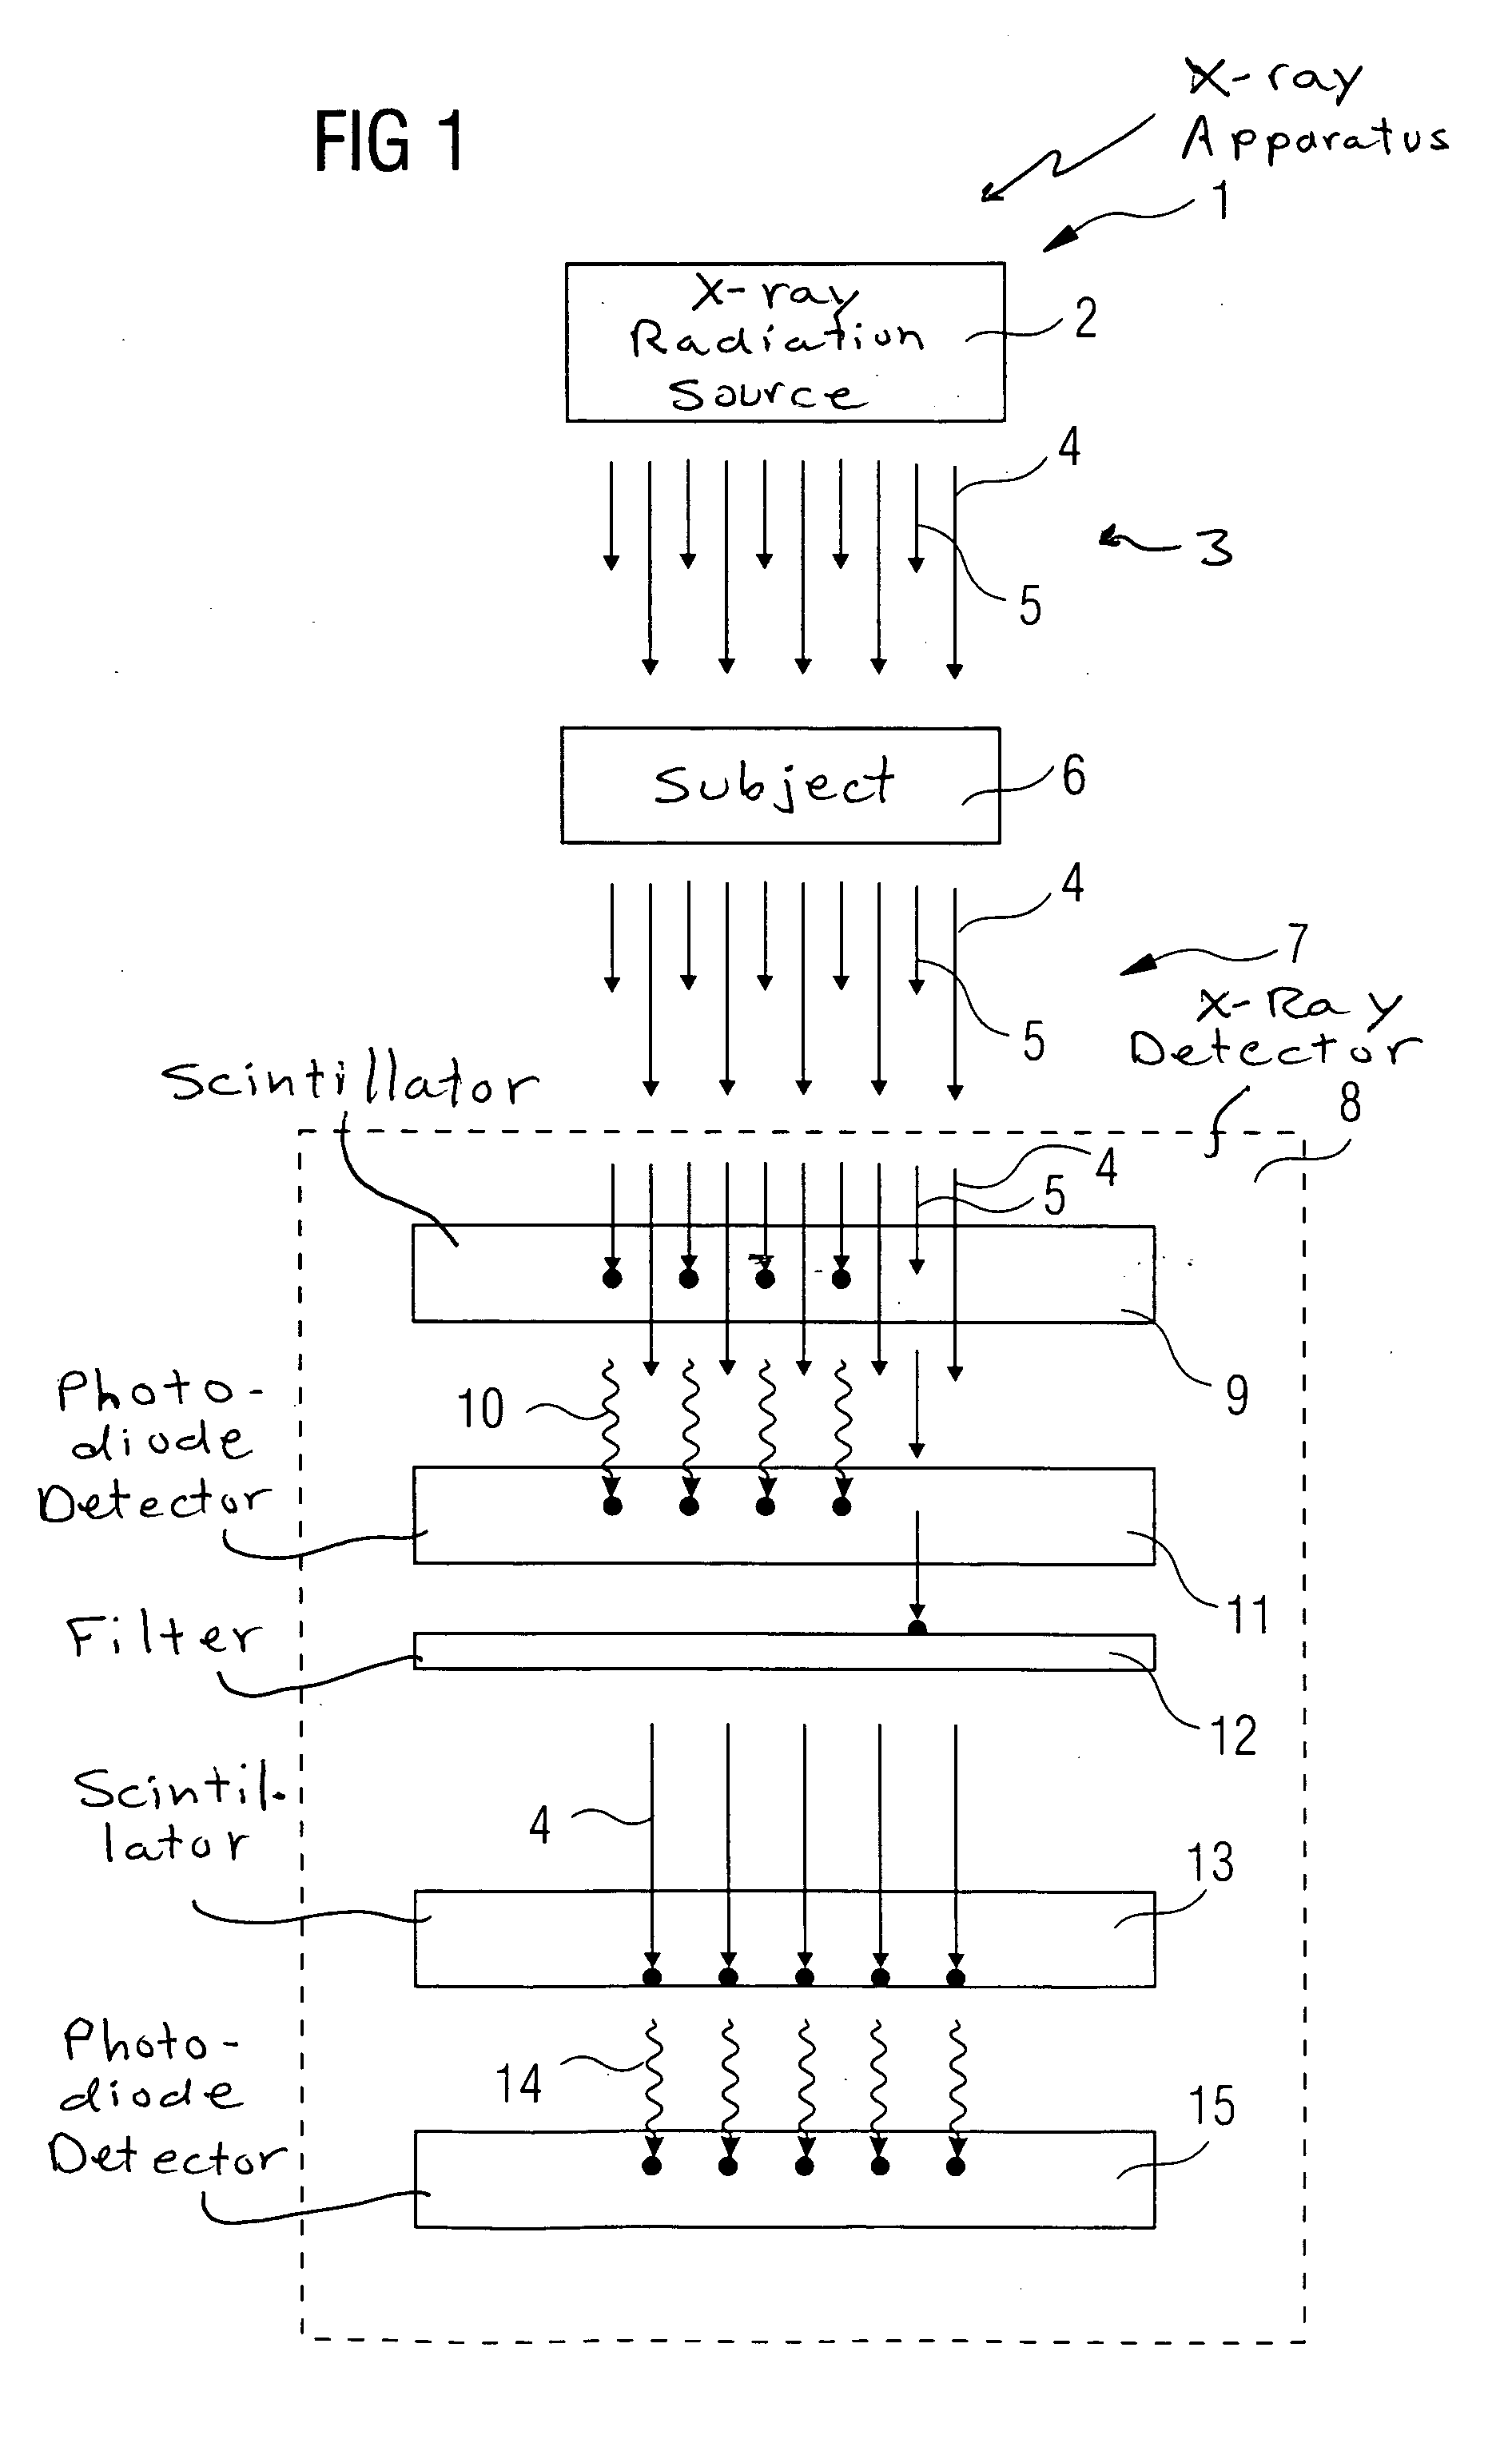 Apparatus and method to acquire images with high-energy photons